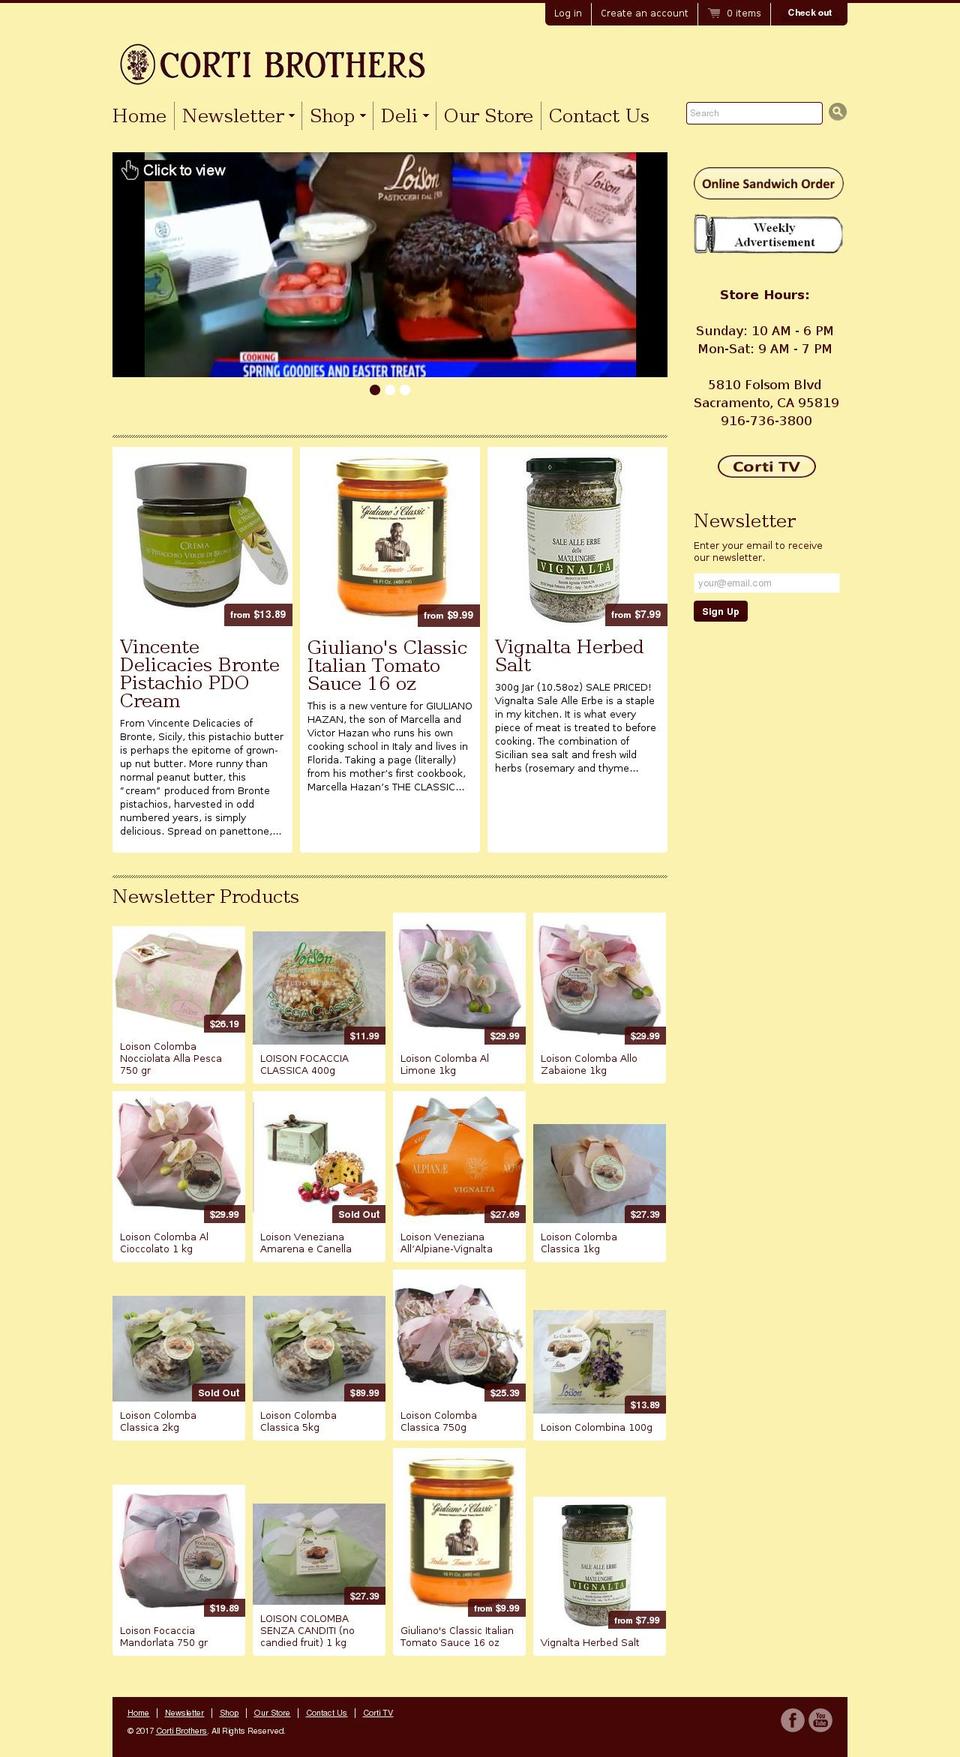 Radiance Shopify theme site example cortibrothers.com